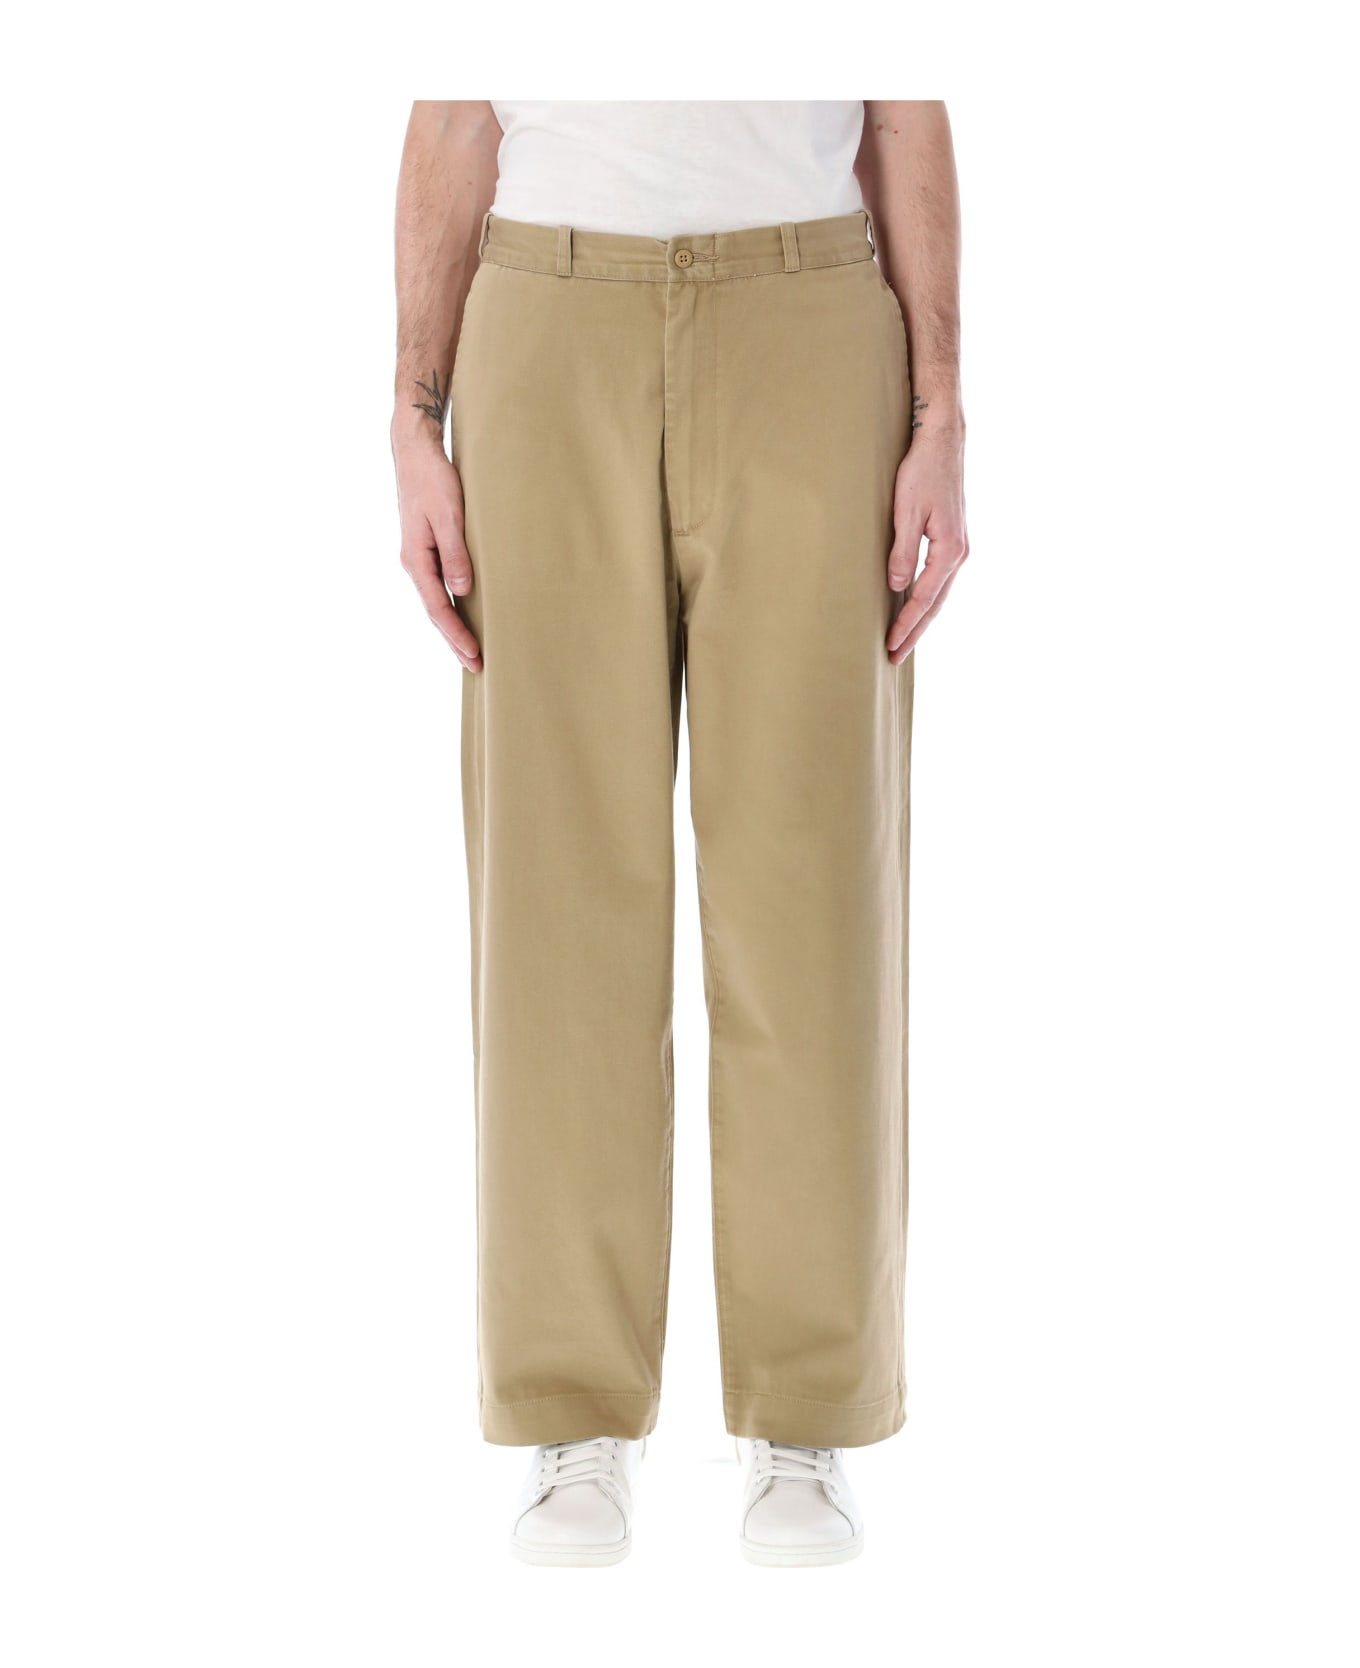 Levi's Skate Loose Chino - BEIGE